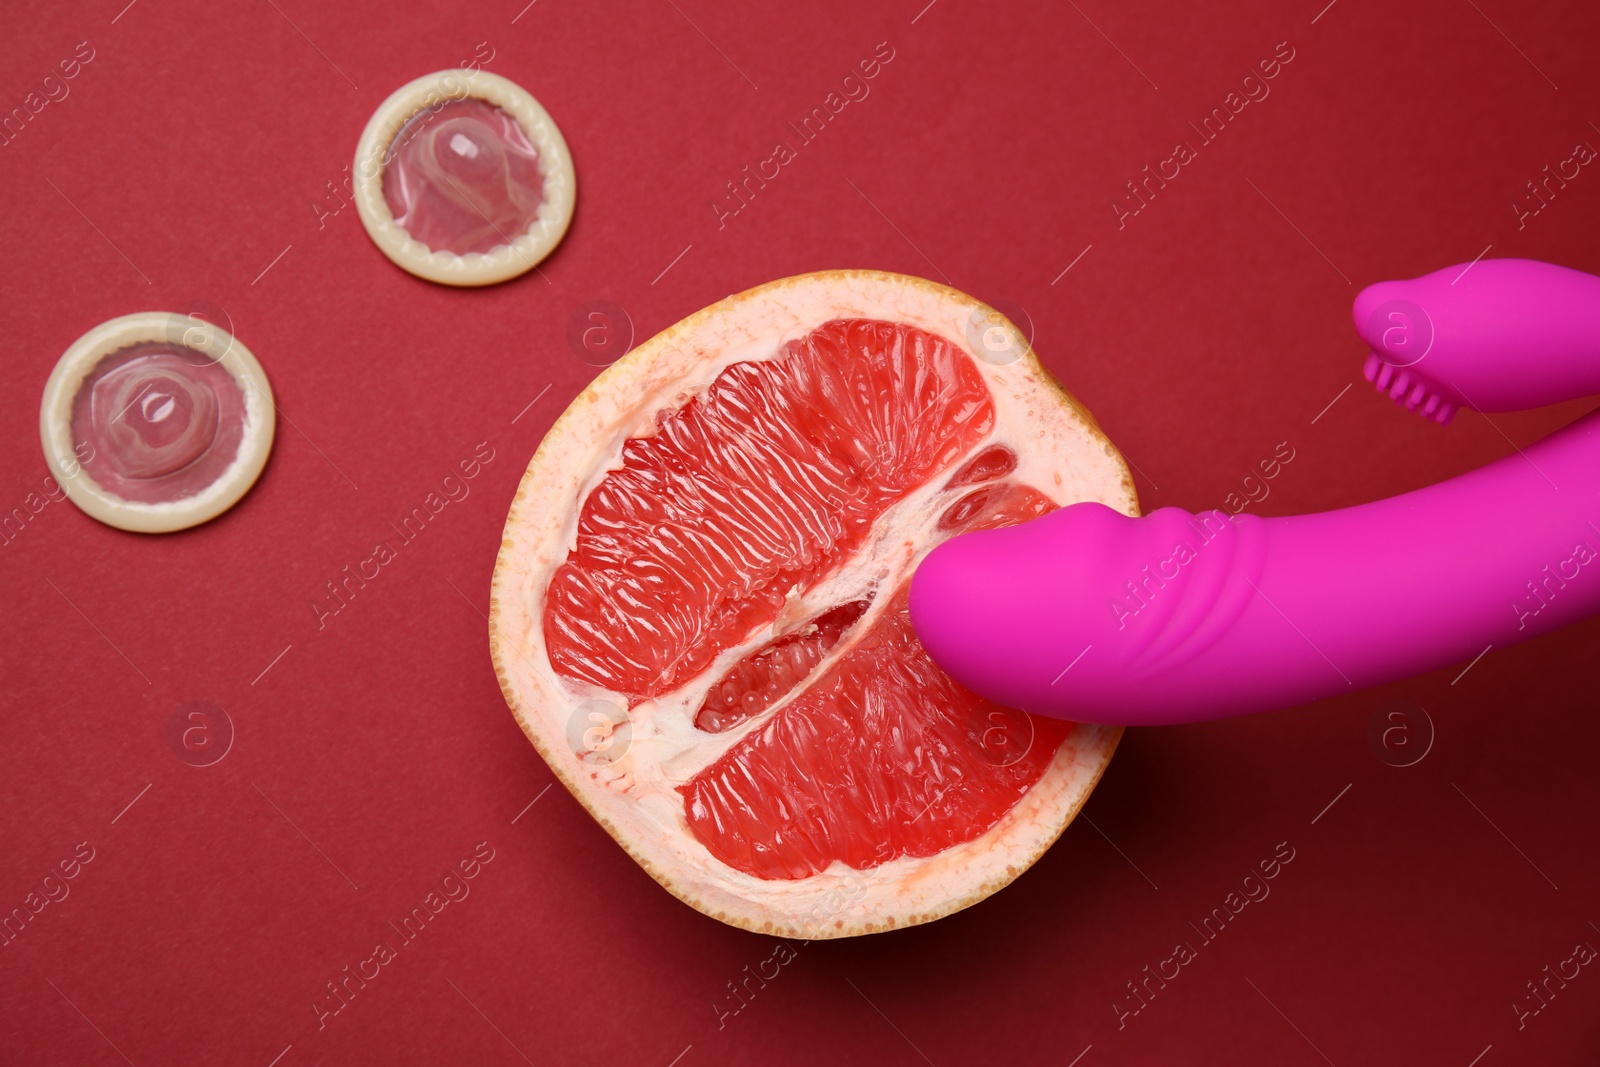 Photo of Half of grapefruit, purple vibrator and condoms on red background, flat lay. Sex concept